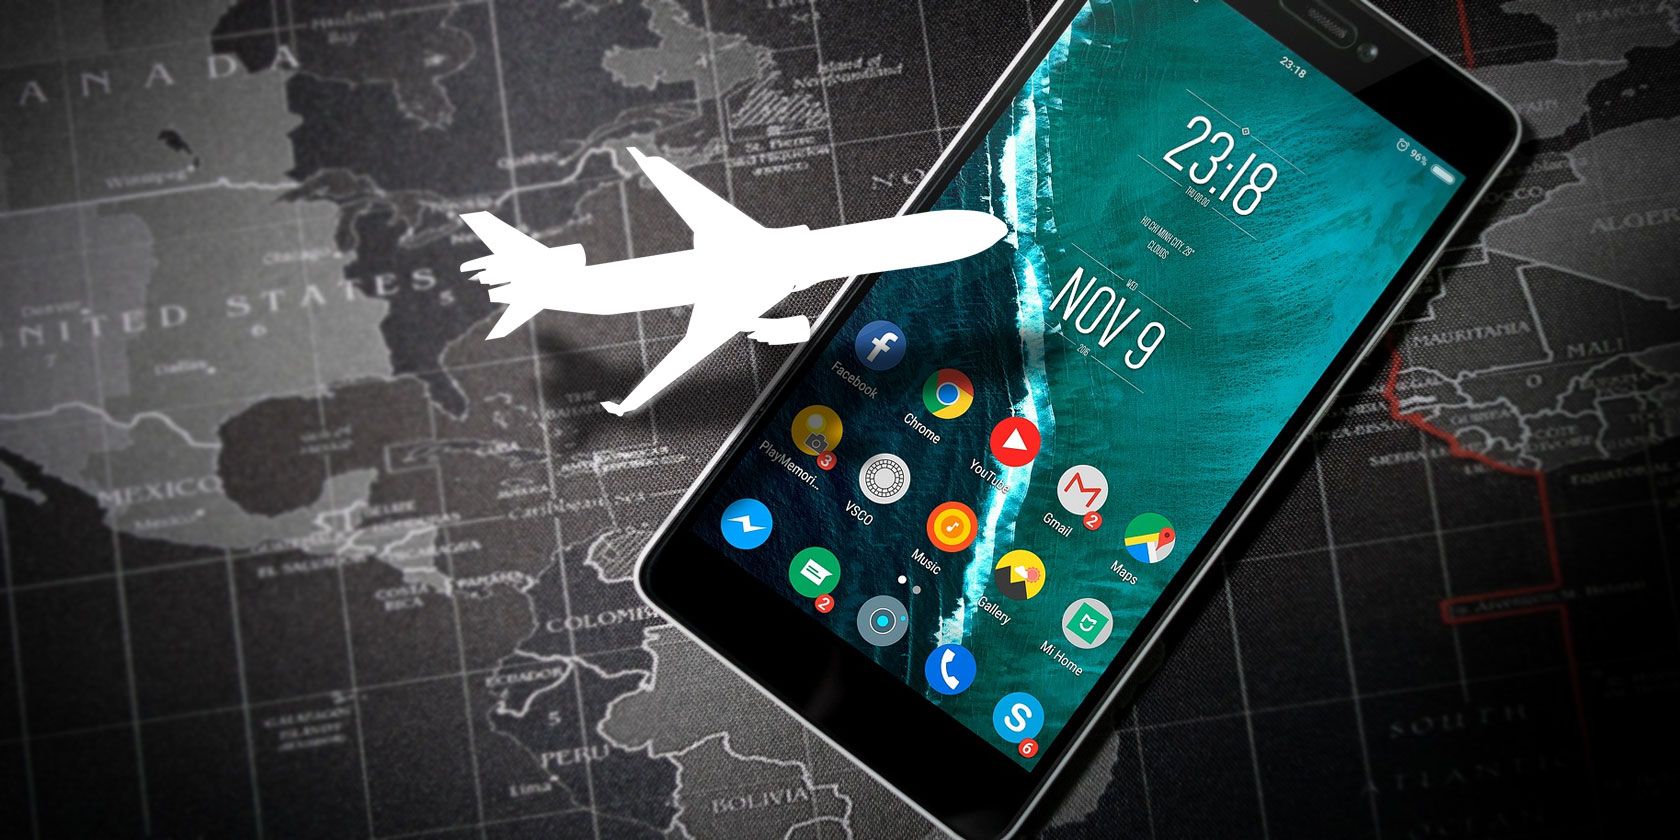 HDG Explains : What Is Airplane Mode On Your Smartphone Or Tablet?